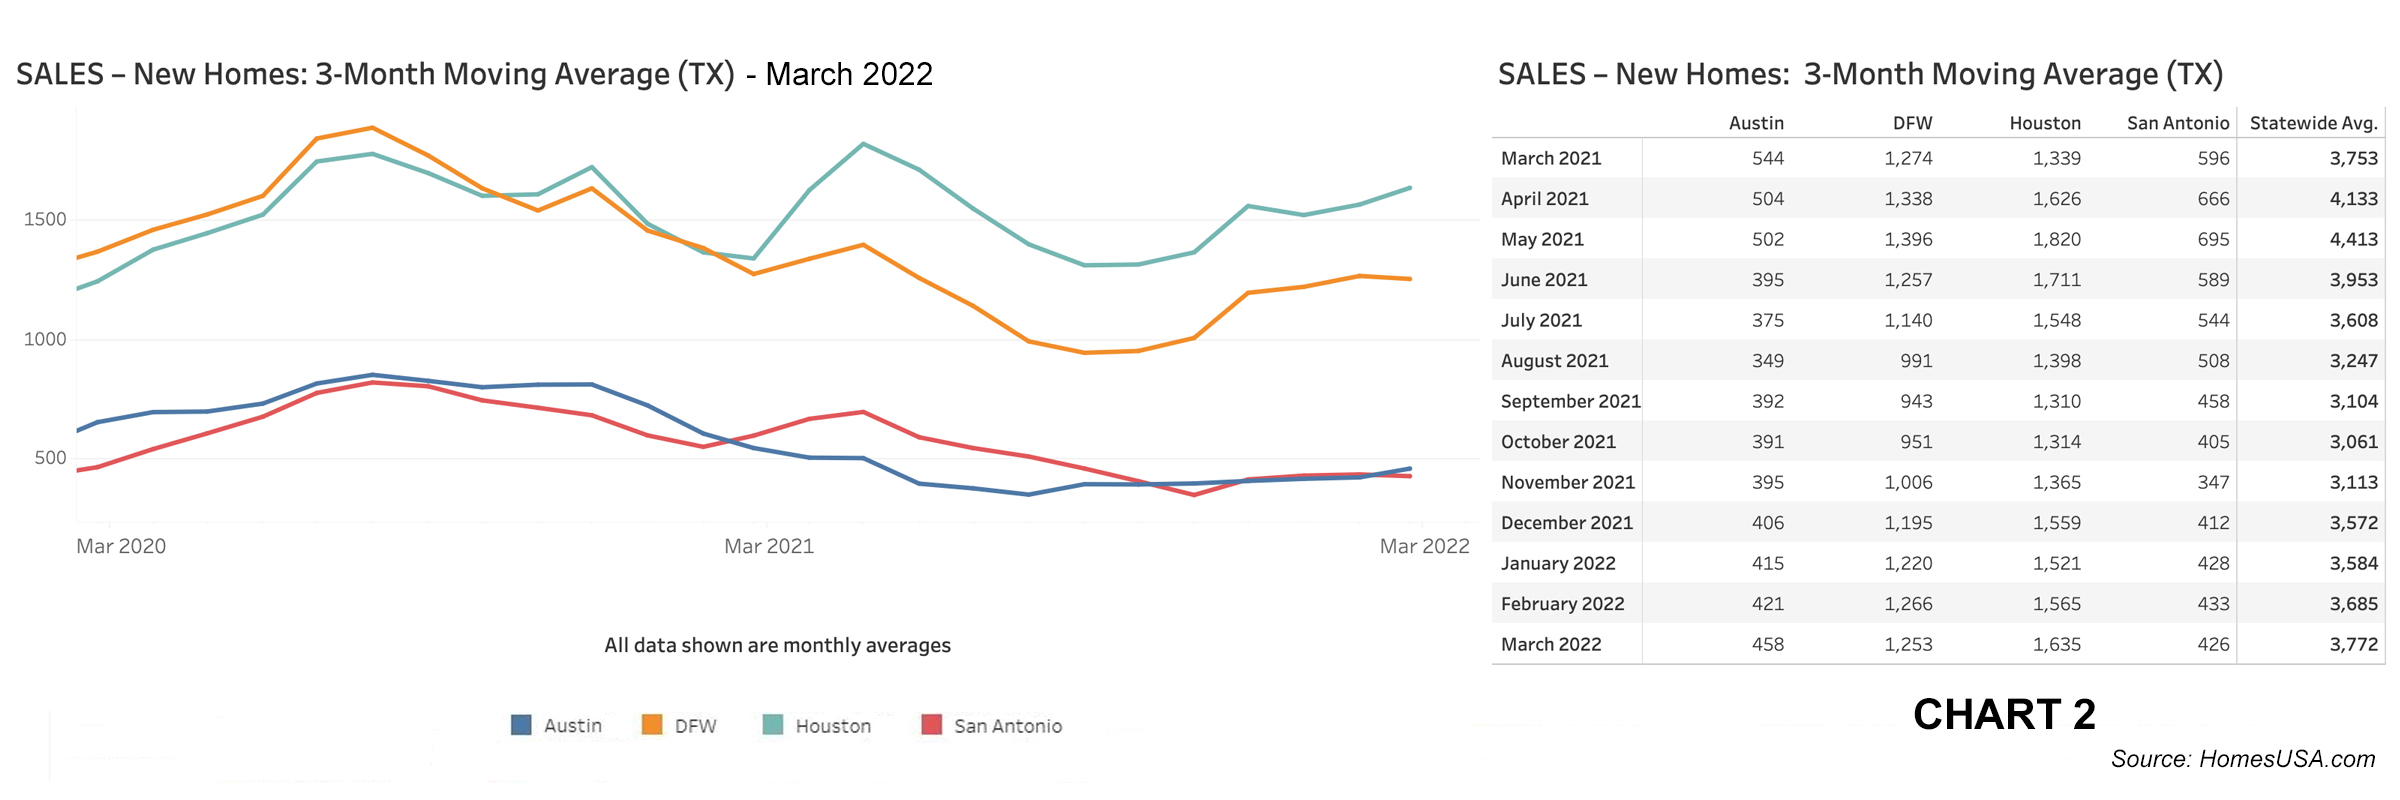 Chart 2: Texas New Home Sales – March 2022